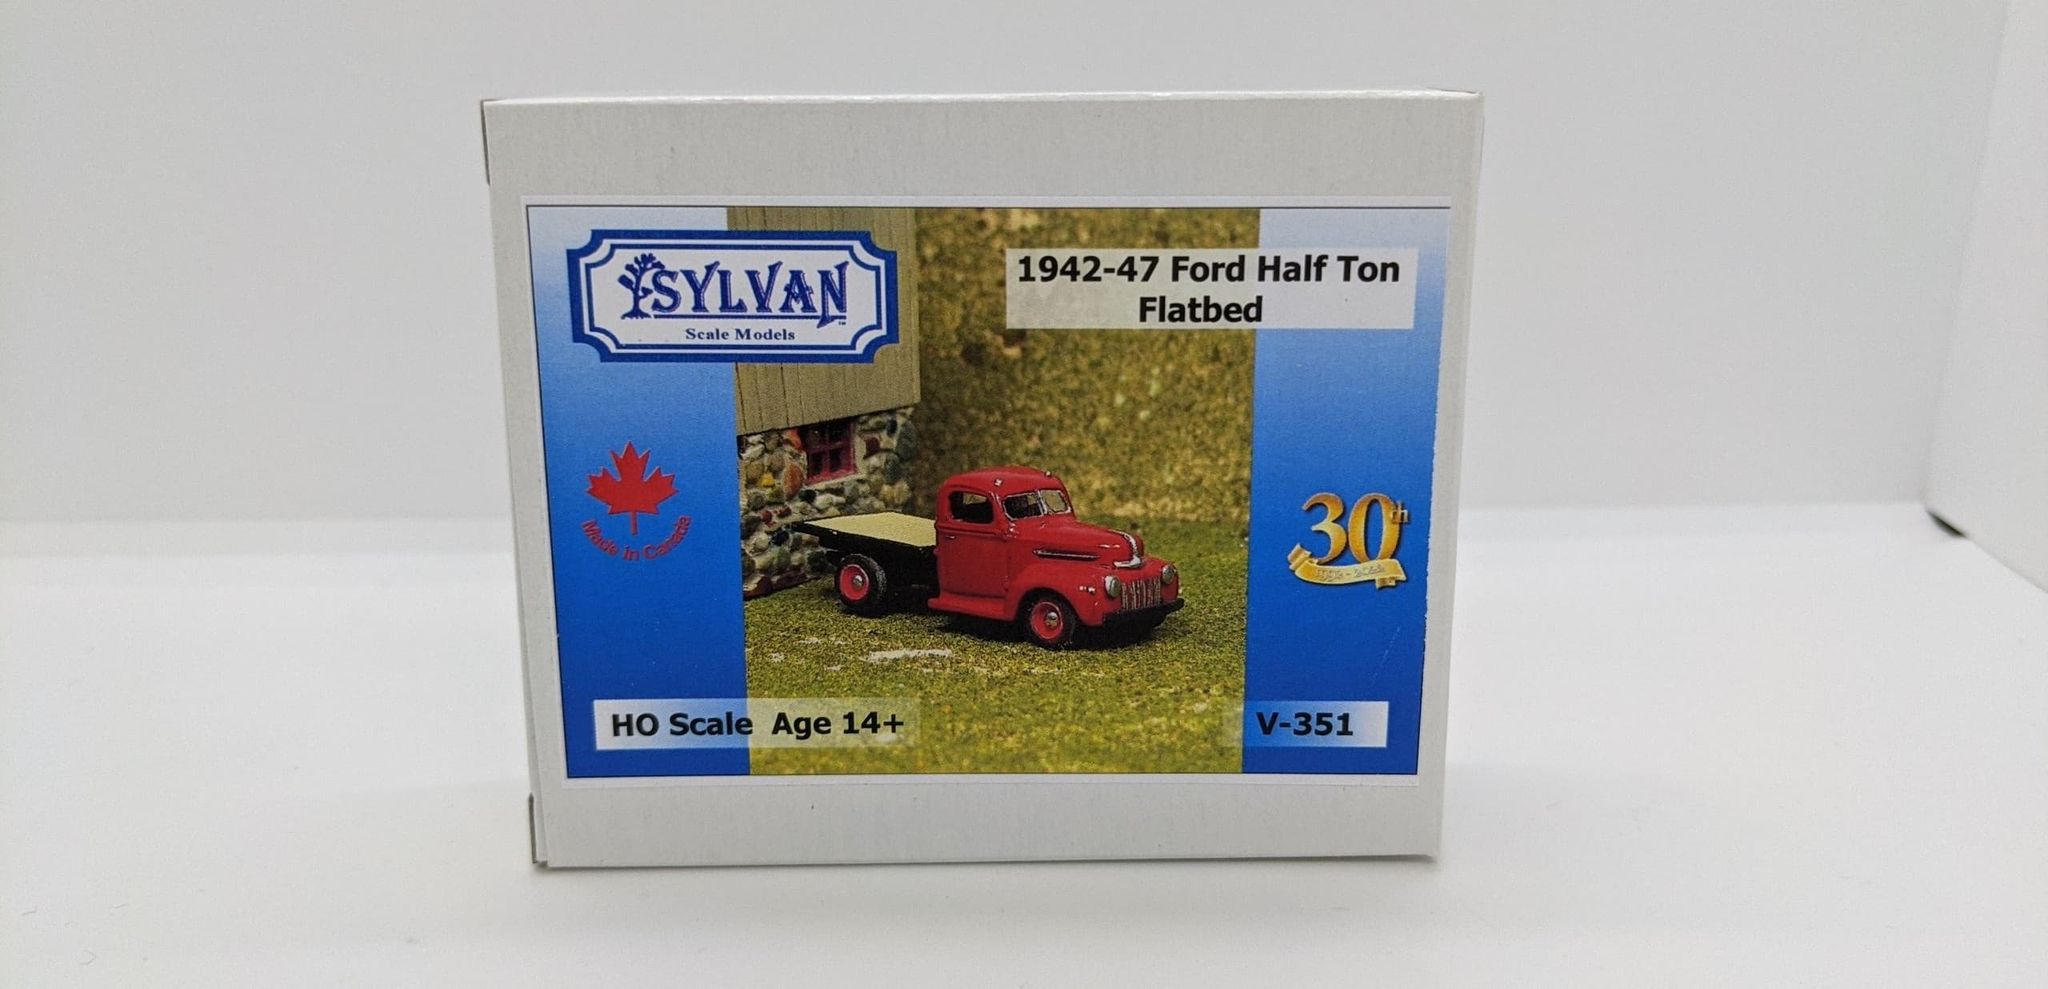 Sylvan Scale Models V-351 HO Scale - 42/47 Ford Half Ton Flatbed- Unpainted and Resin Cast Kit